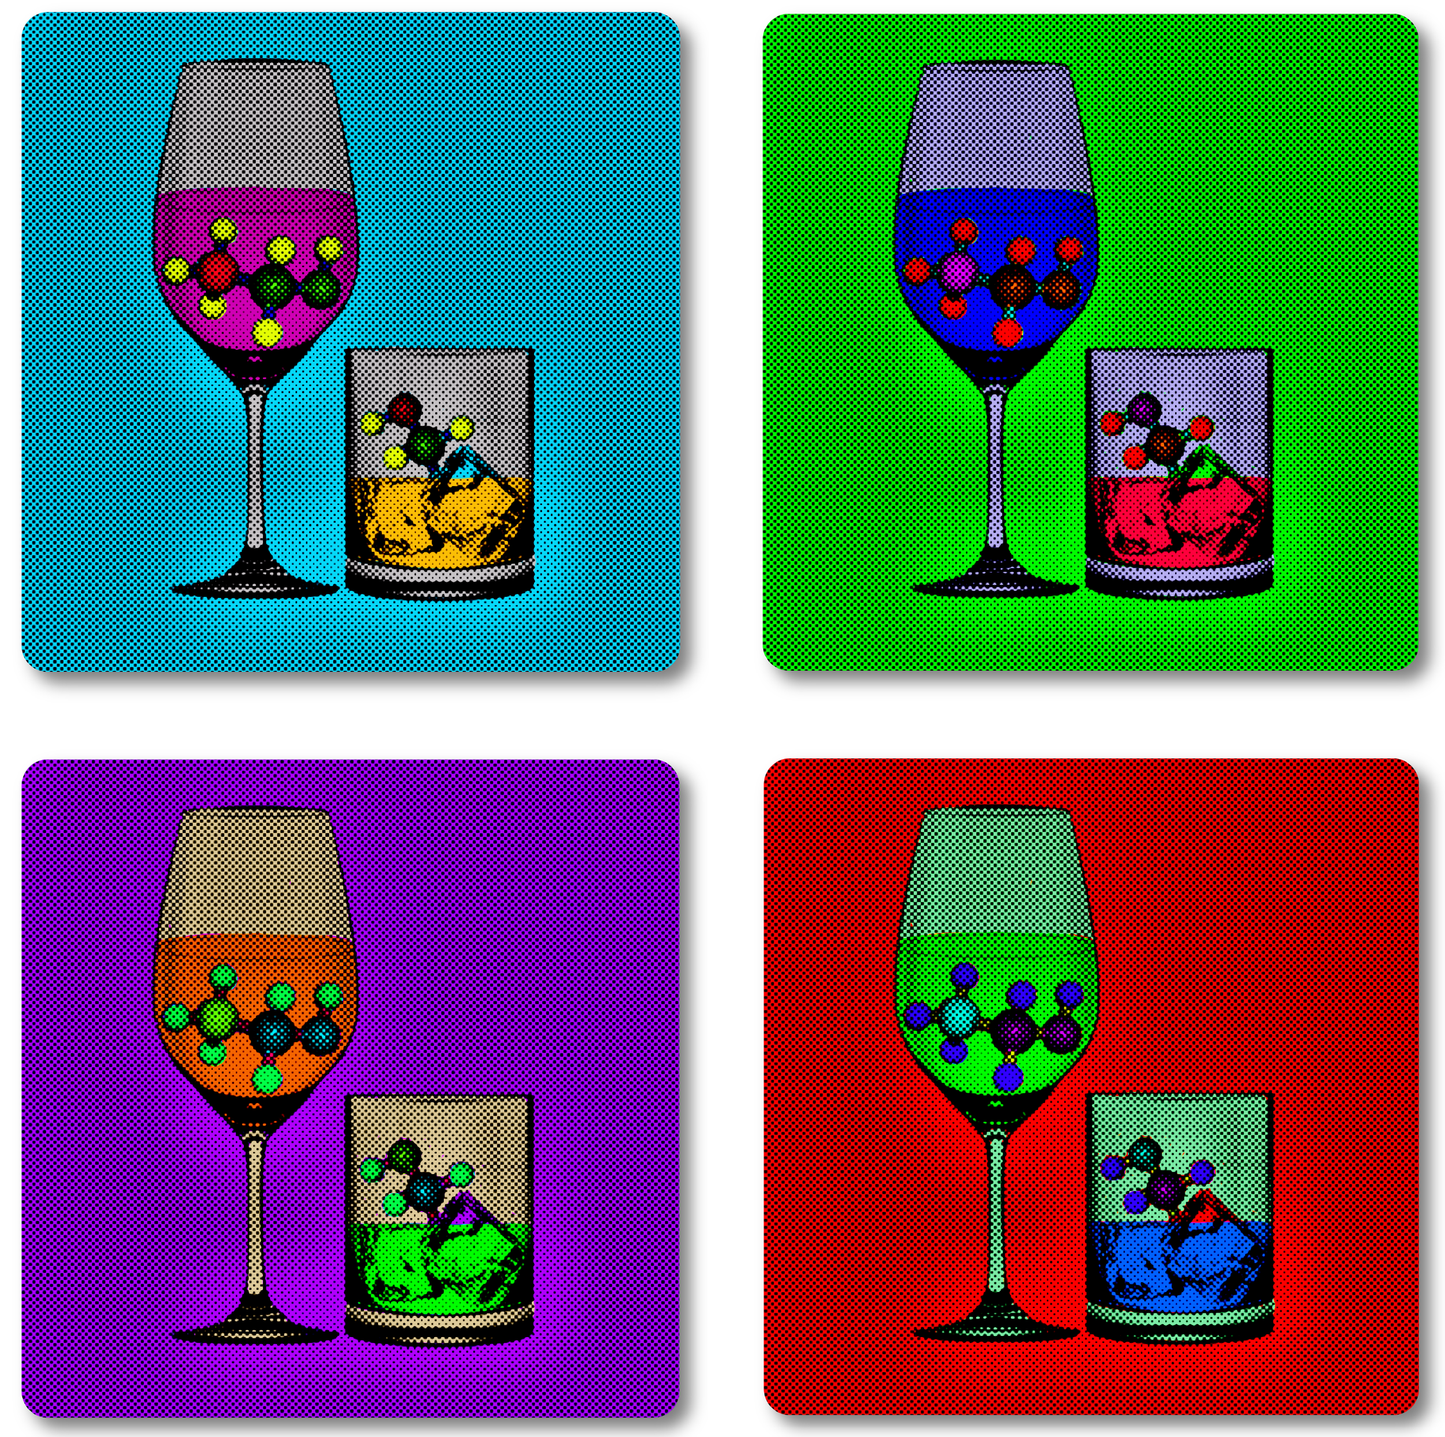 Drinks coasters with wine glass, whisky glass and ethanol molecule